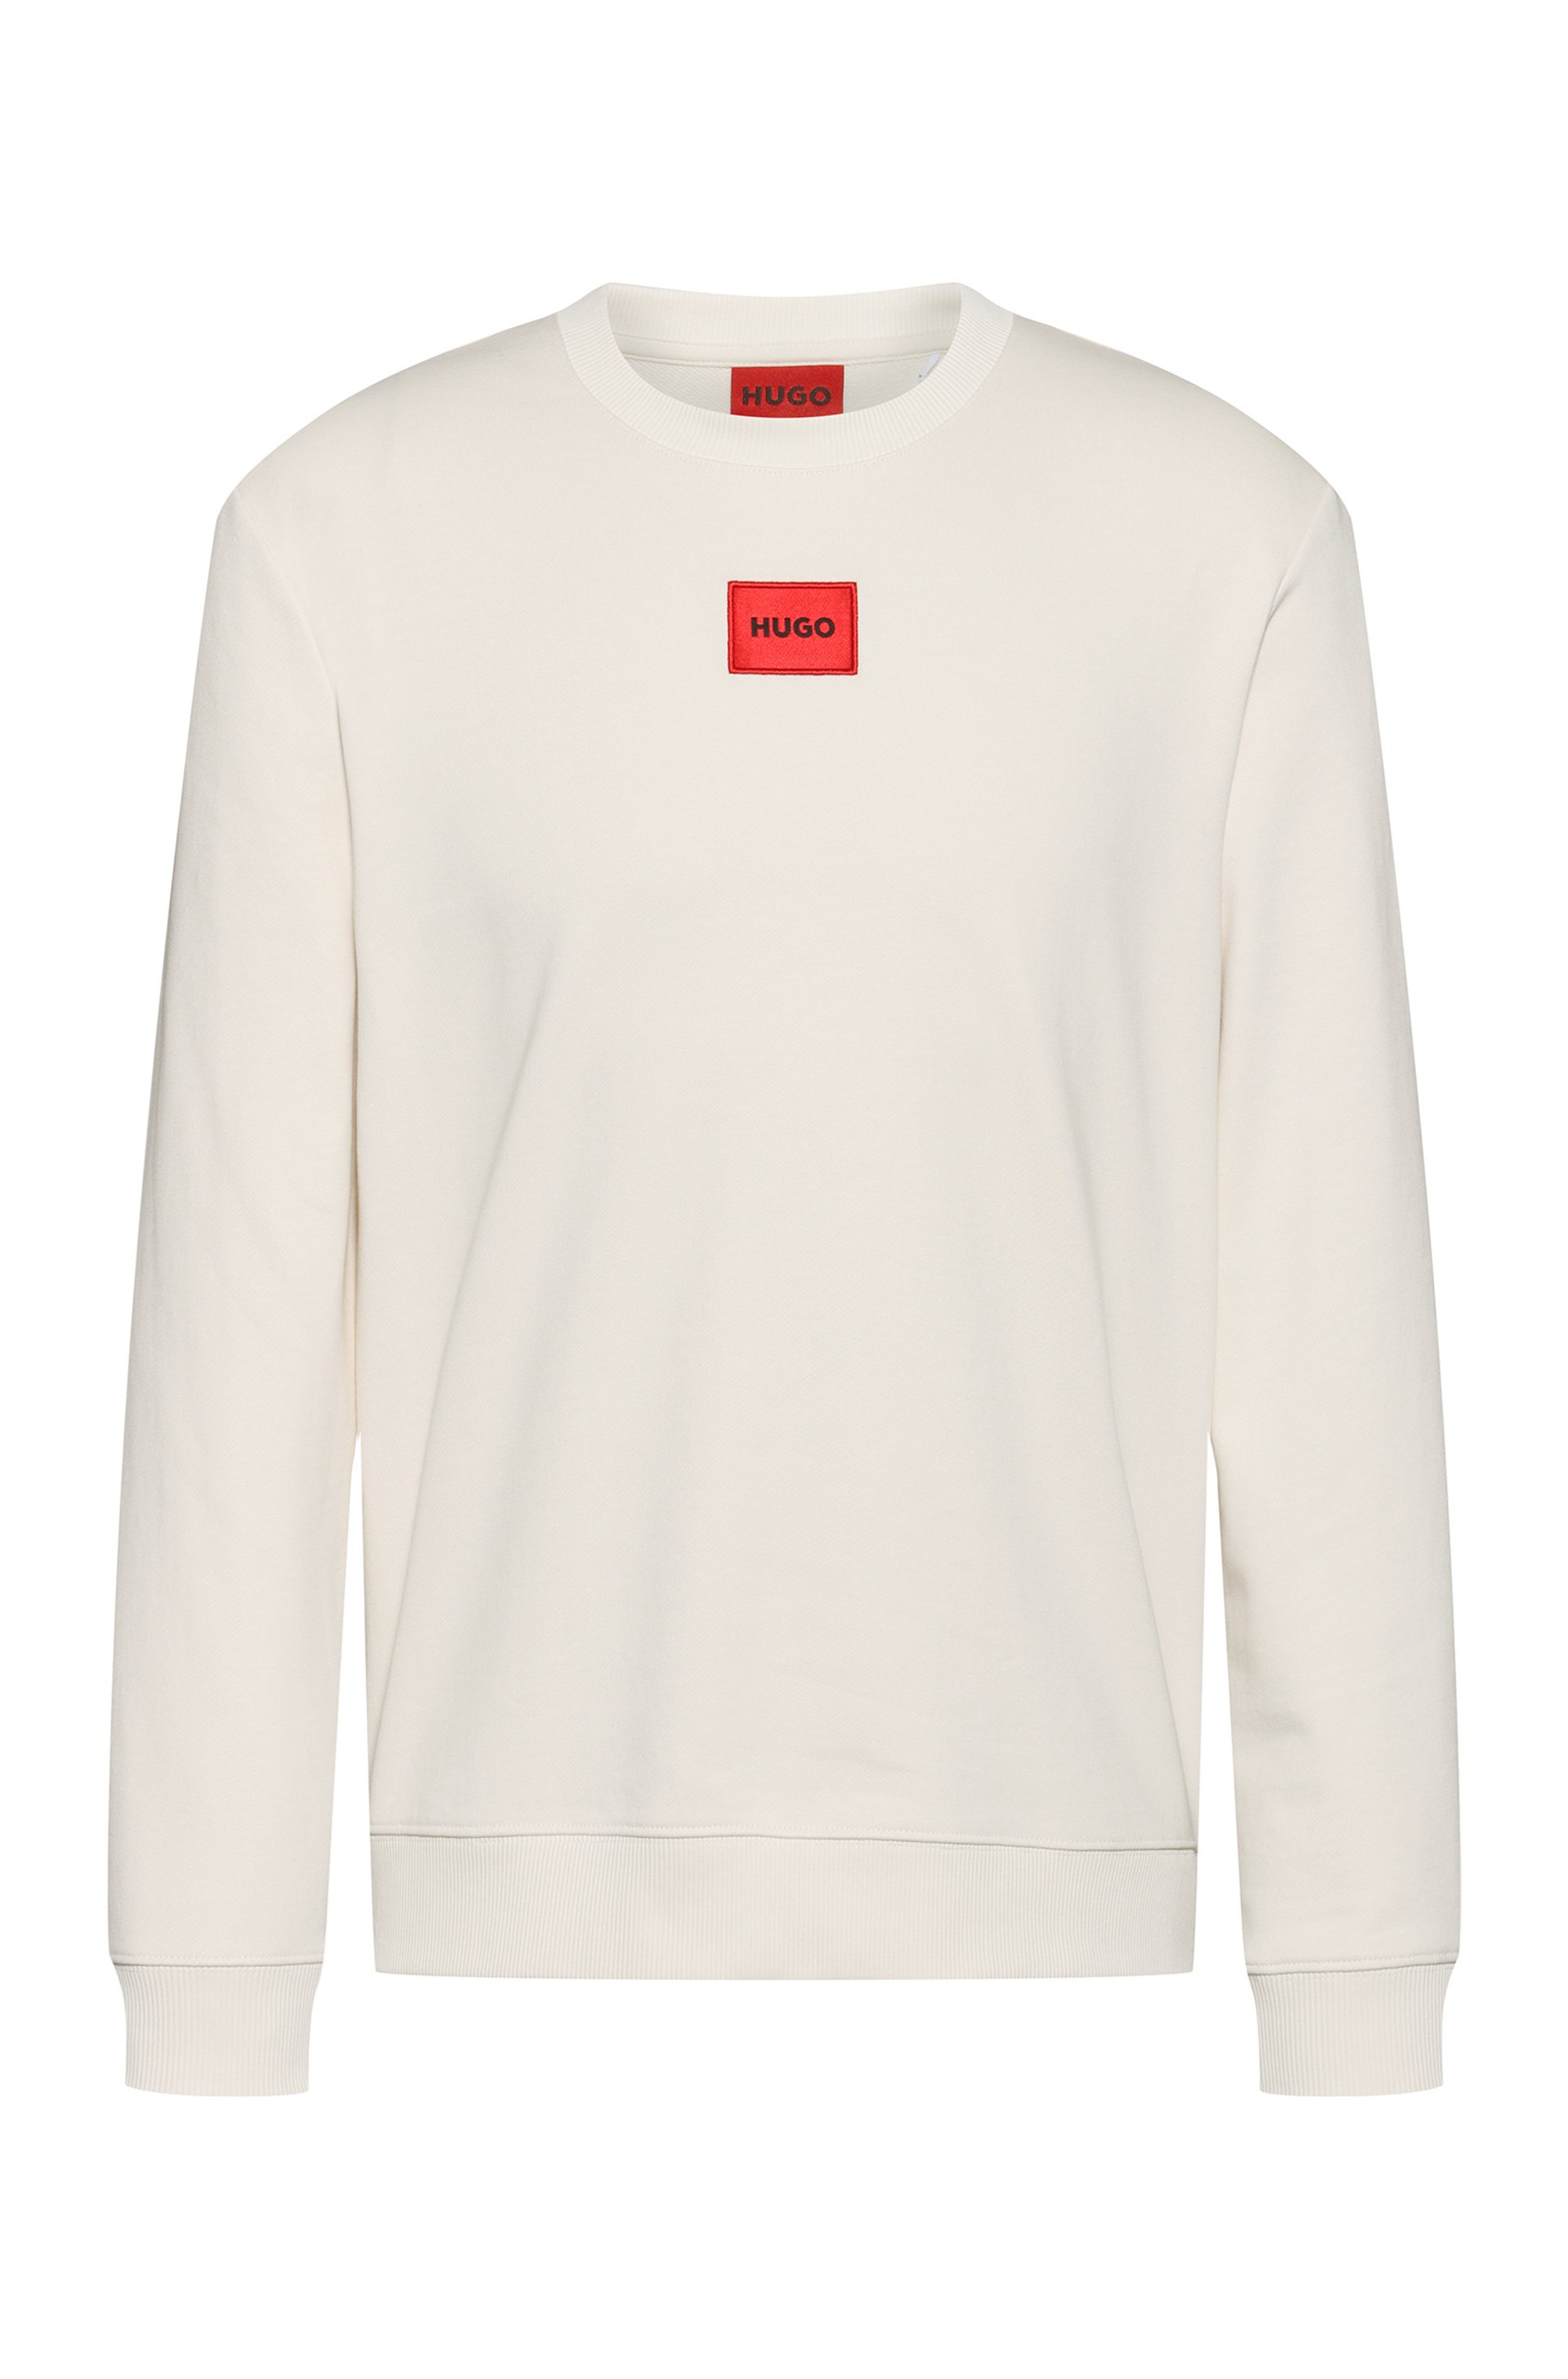 Cotton-terry sweatshirt with red logo label, White